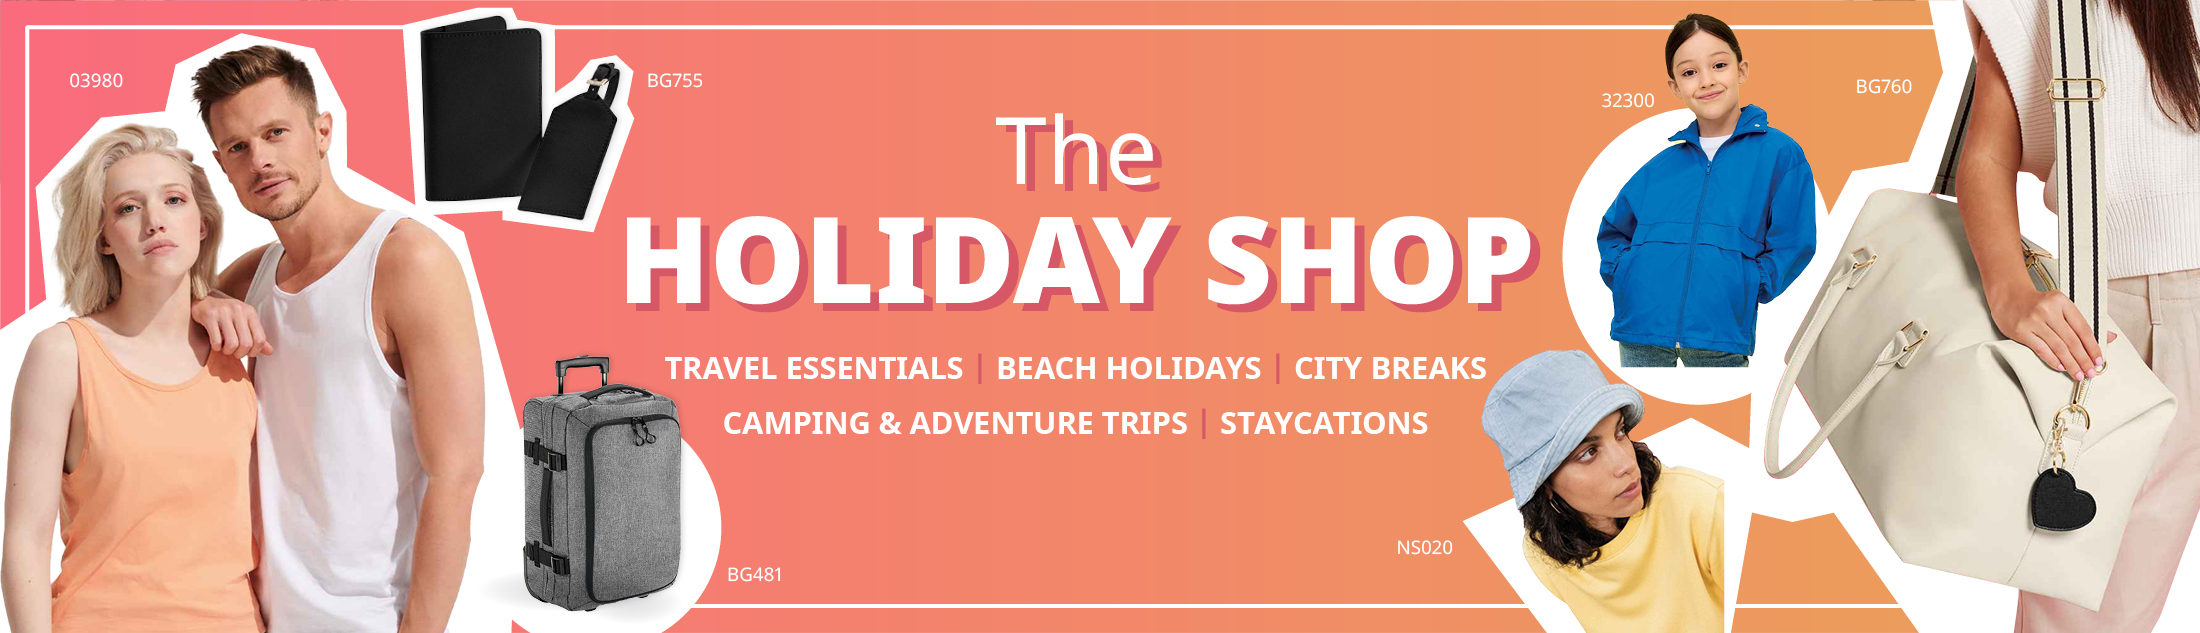 The Holiday Shop is back!